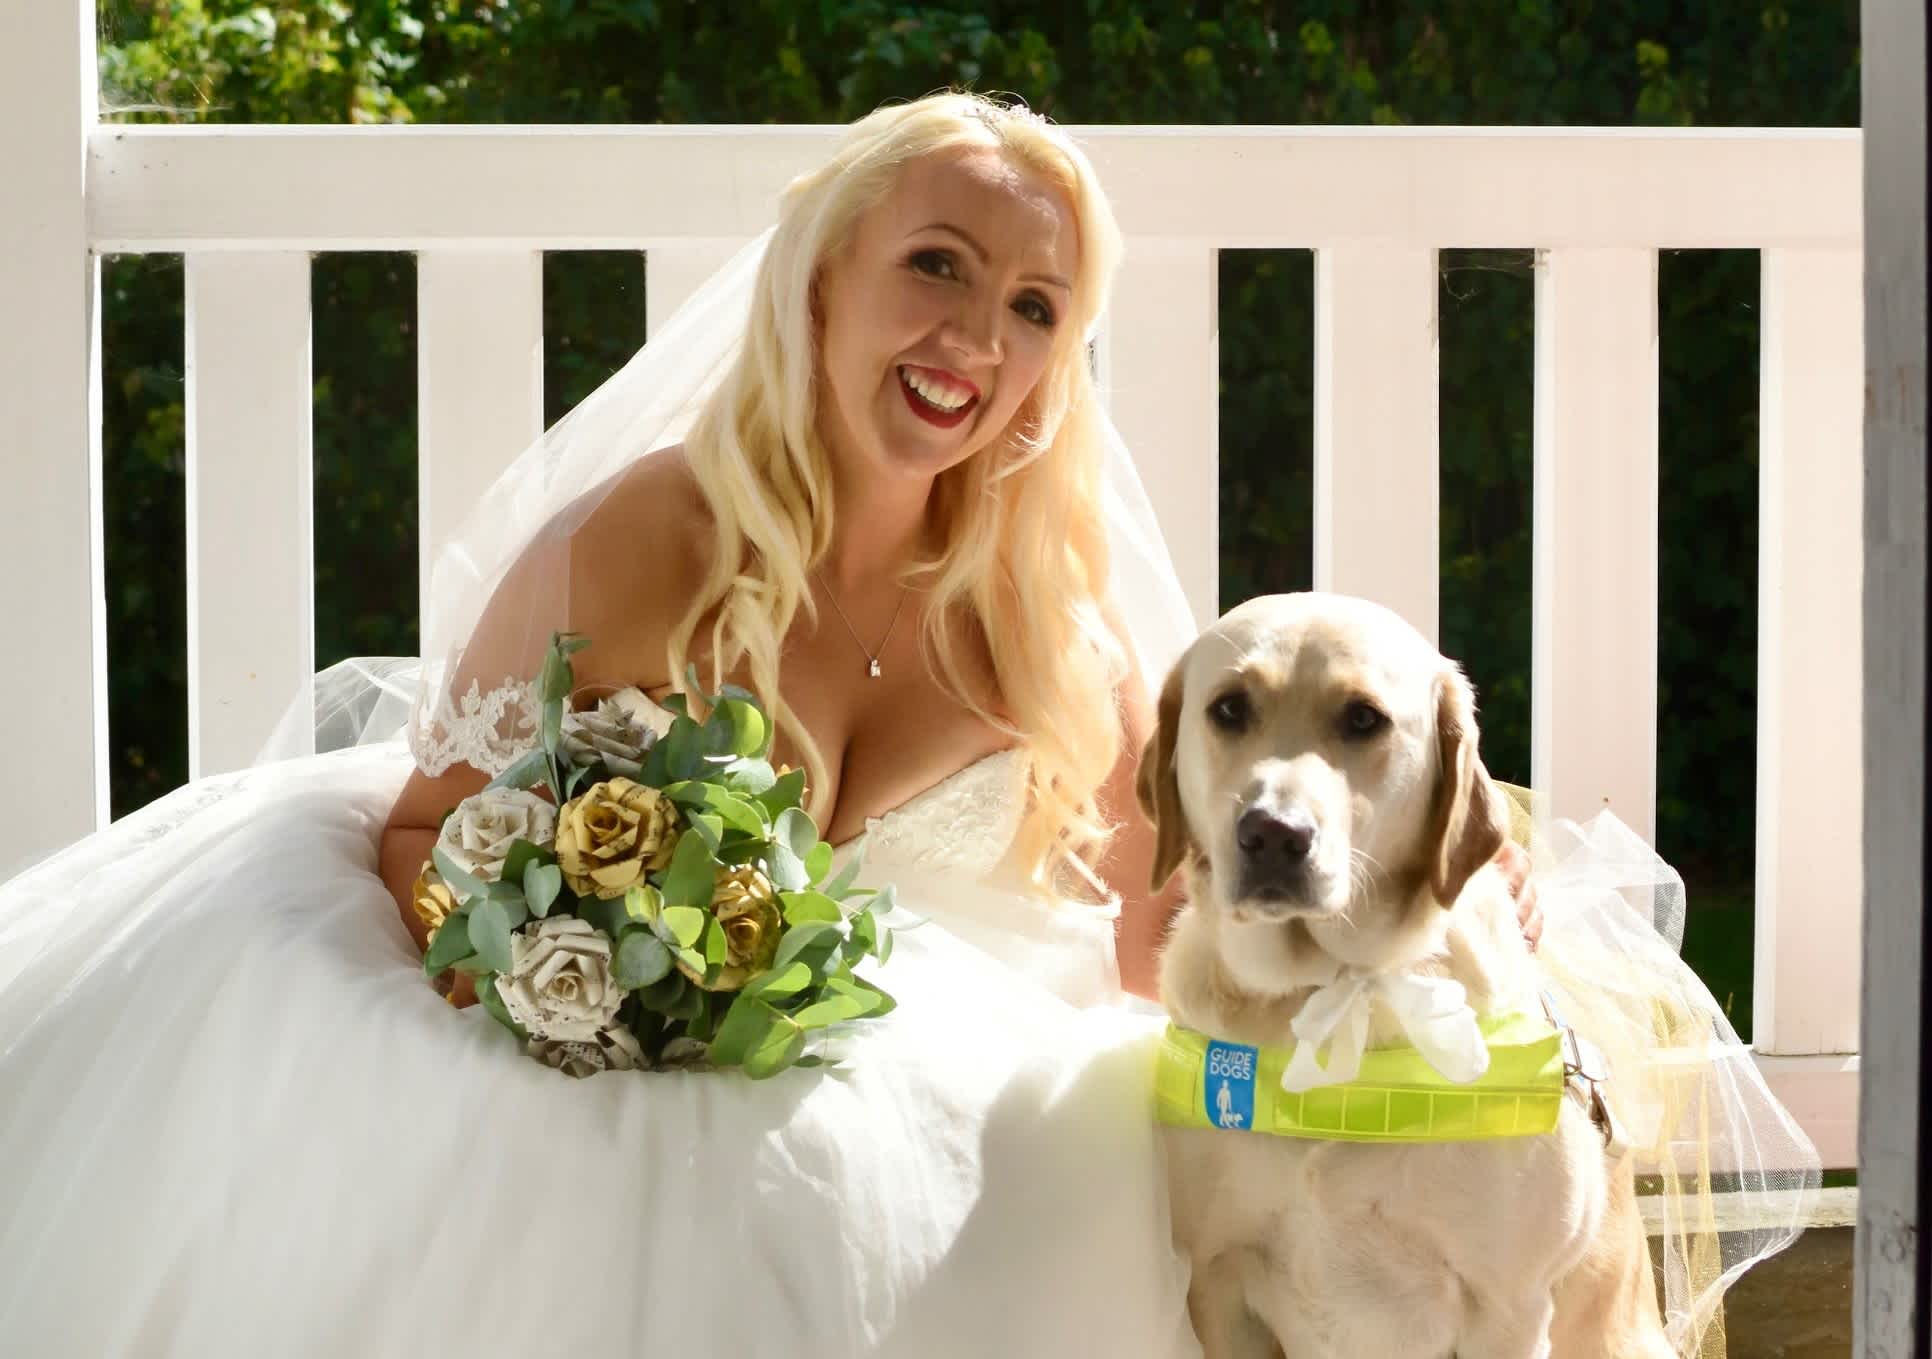 Lizzie wears her wedding dress and holds her bouquet on her wedding day next to her guide dog Ziggy